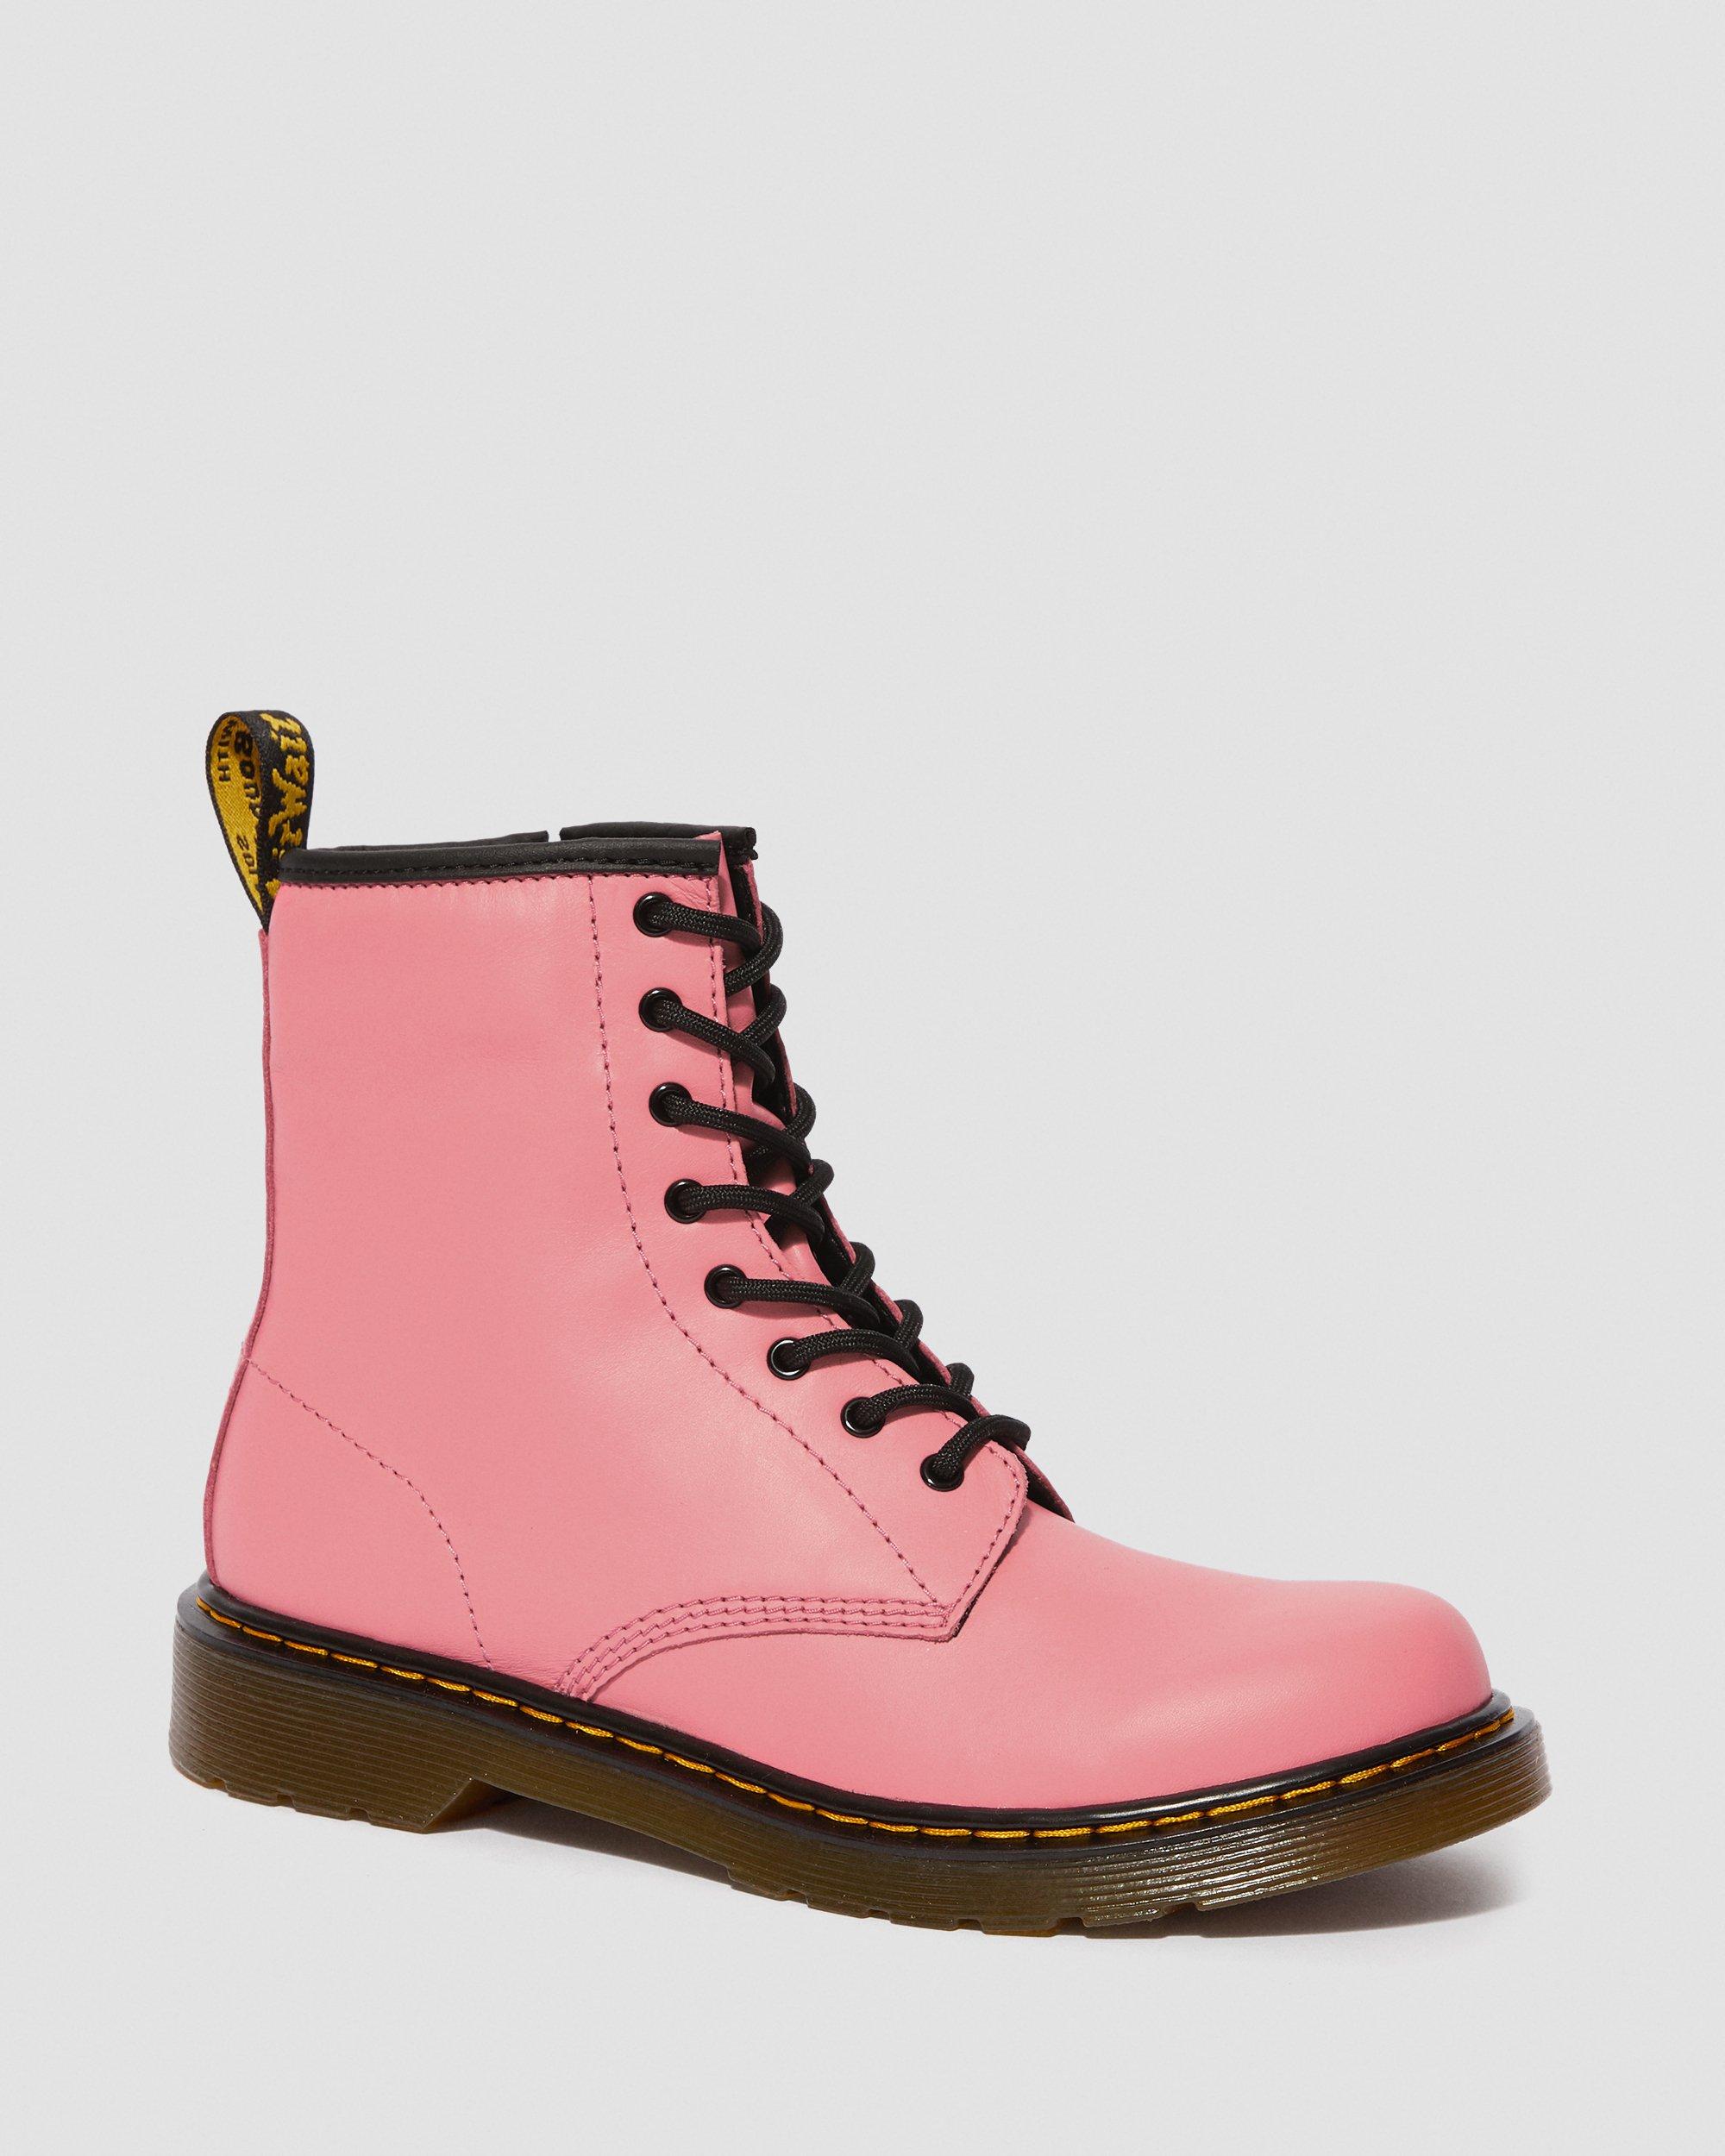 Youth 1460 Leather Lace Up Boots in Acid Pink